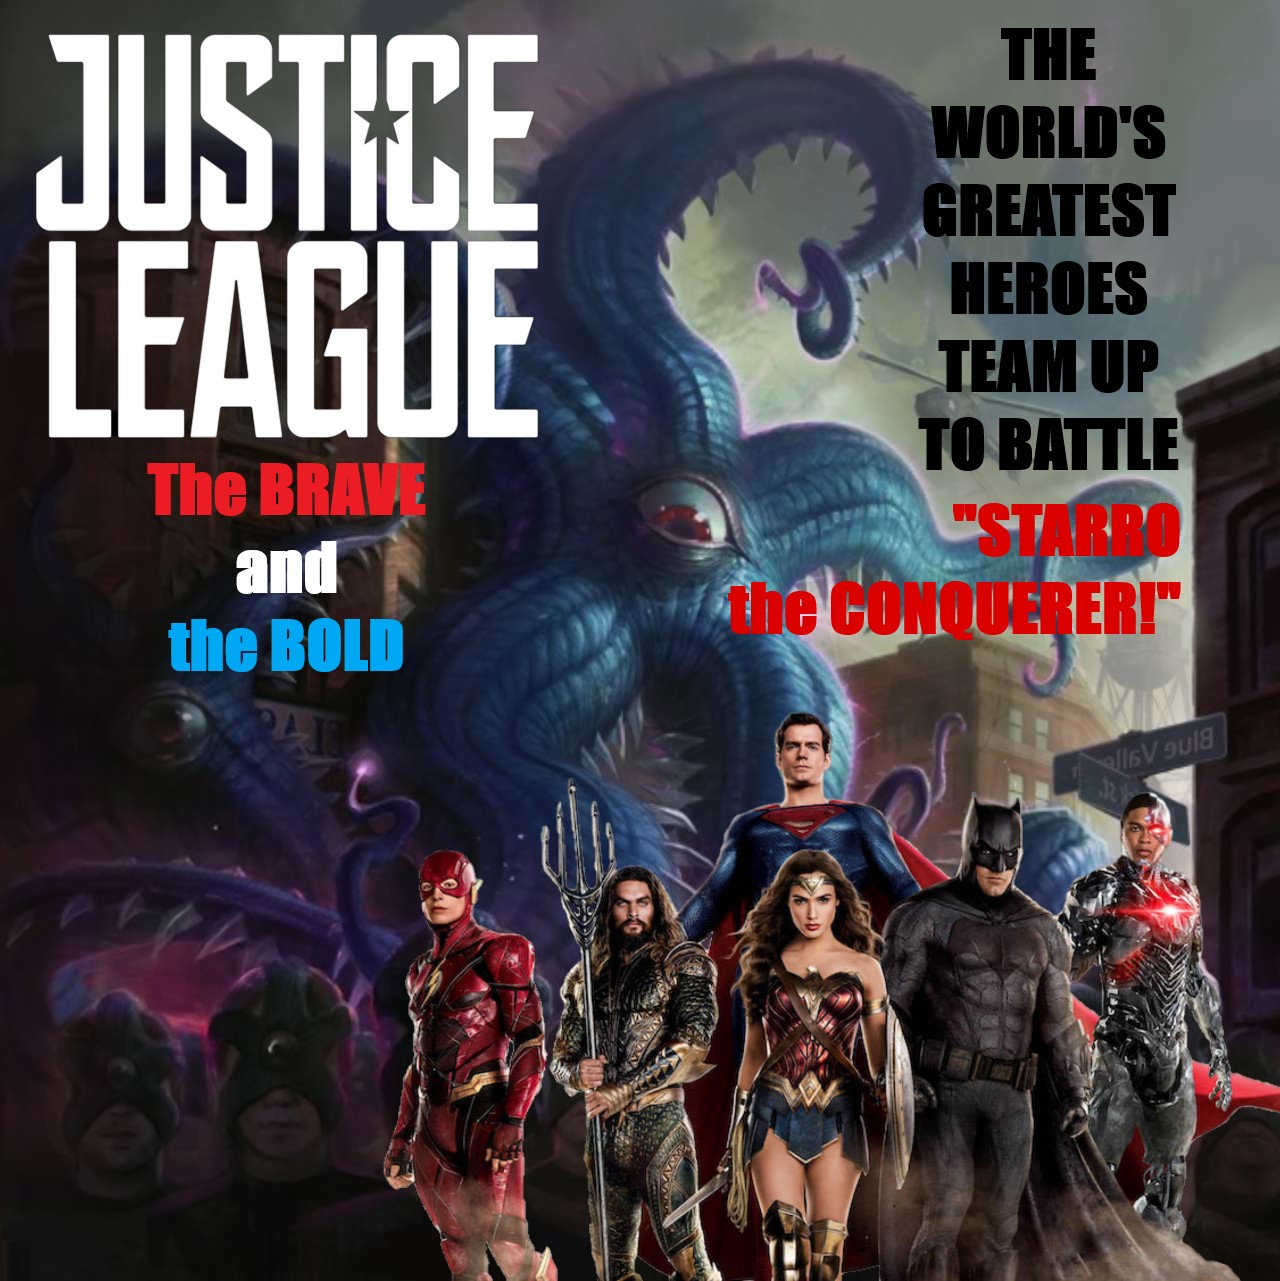 Justice League: The Brave and the Bold by Turn-r on DeviantArt